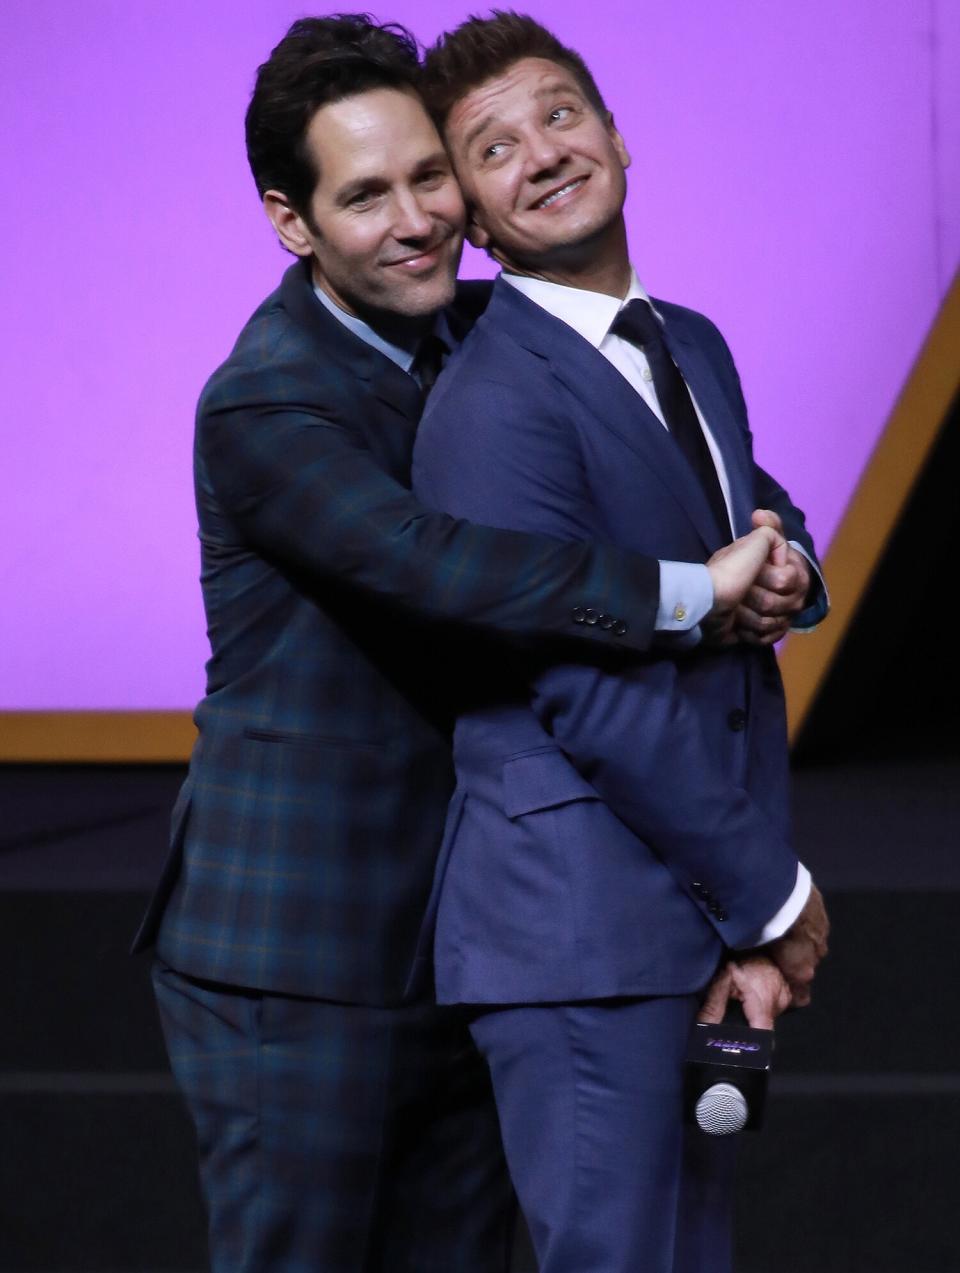 Paul Rudd (L) and Jeremy Renner attend 'Avengers: Endgame' premiere